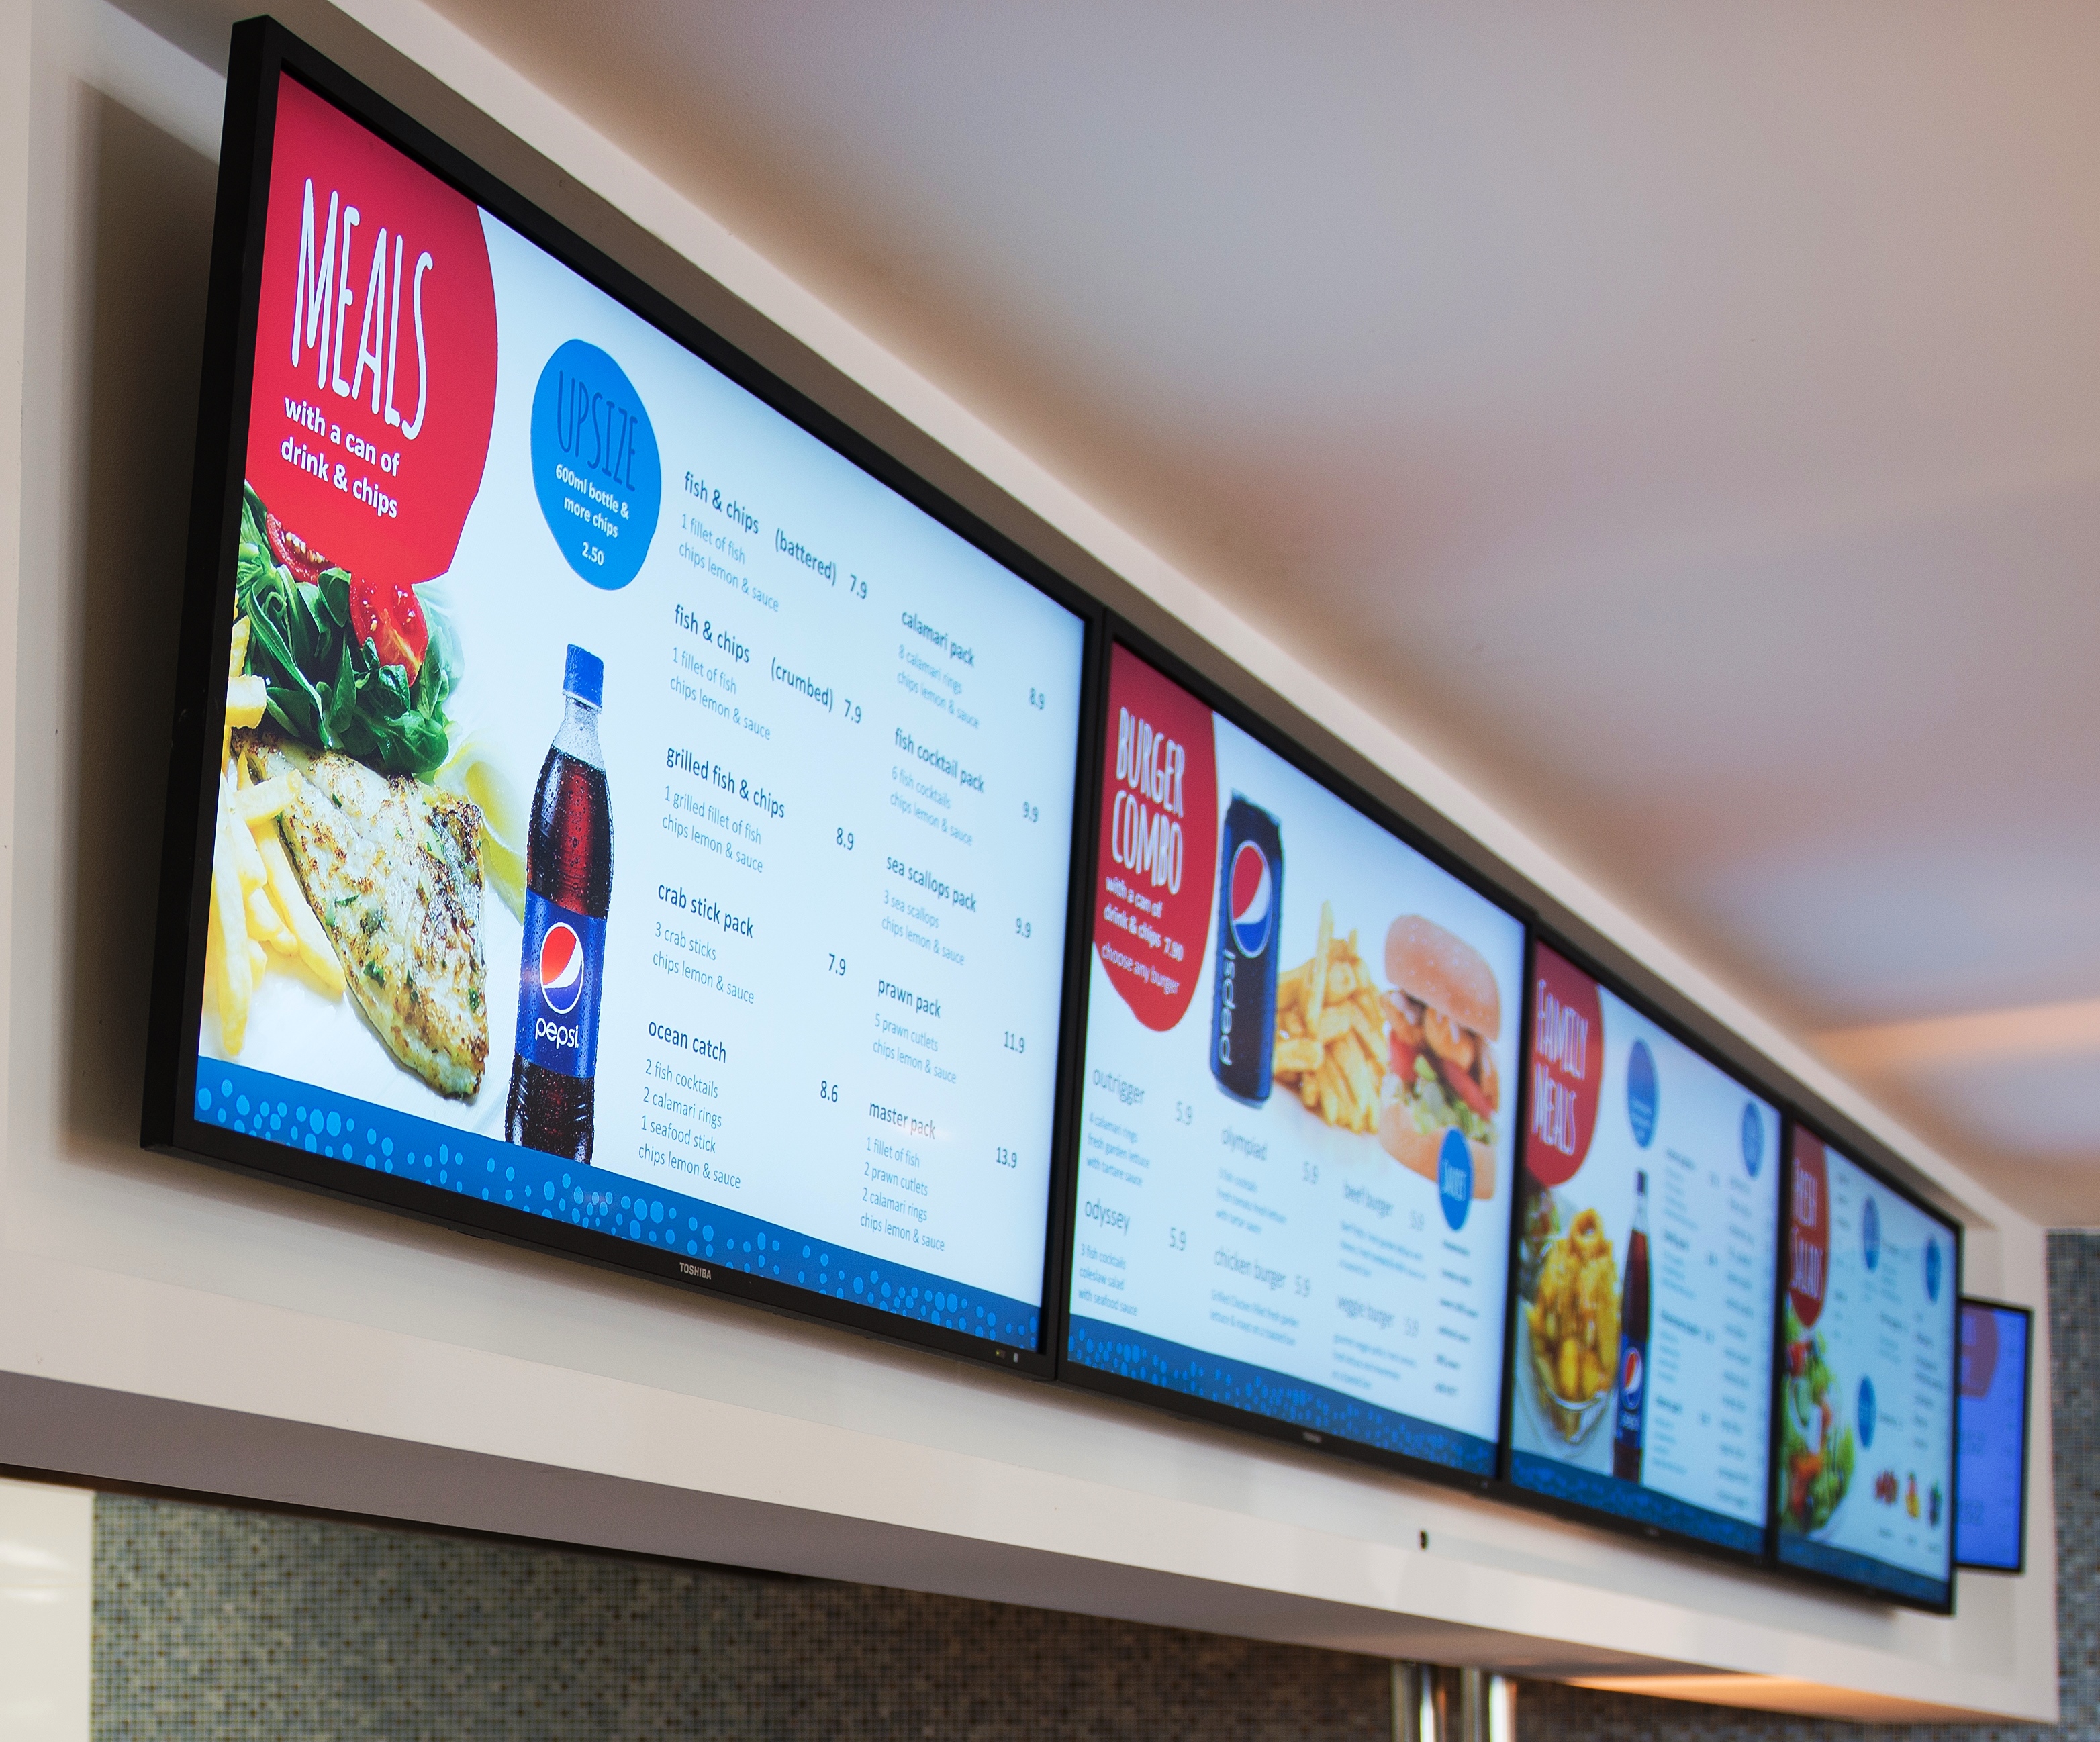 Digital Signage Installed by digital signage experts at Aamcomp in OKC. Get the best when you choose Aamcomp!